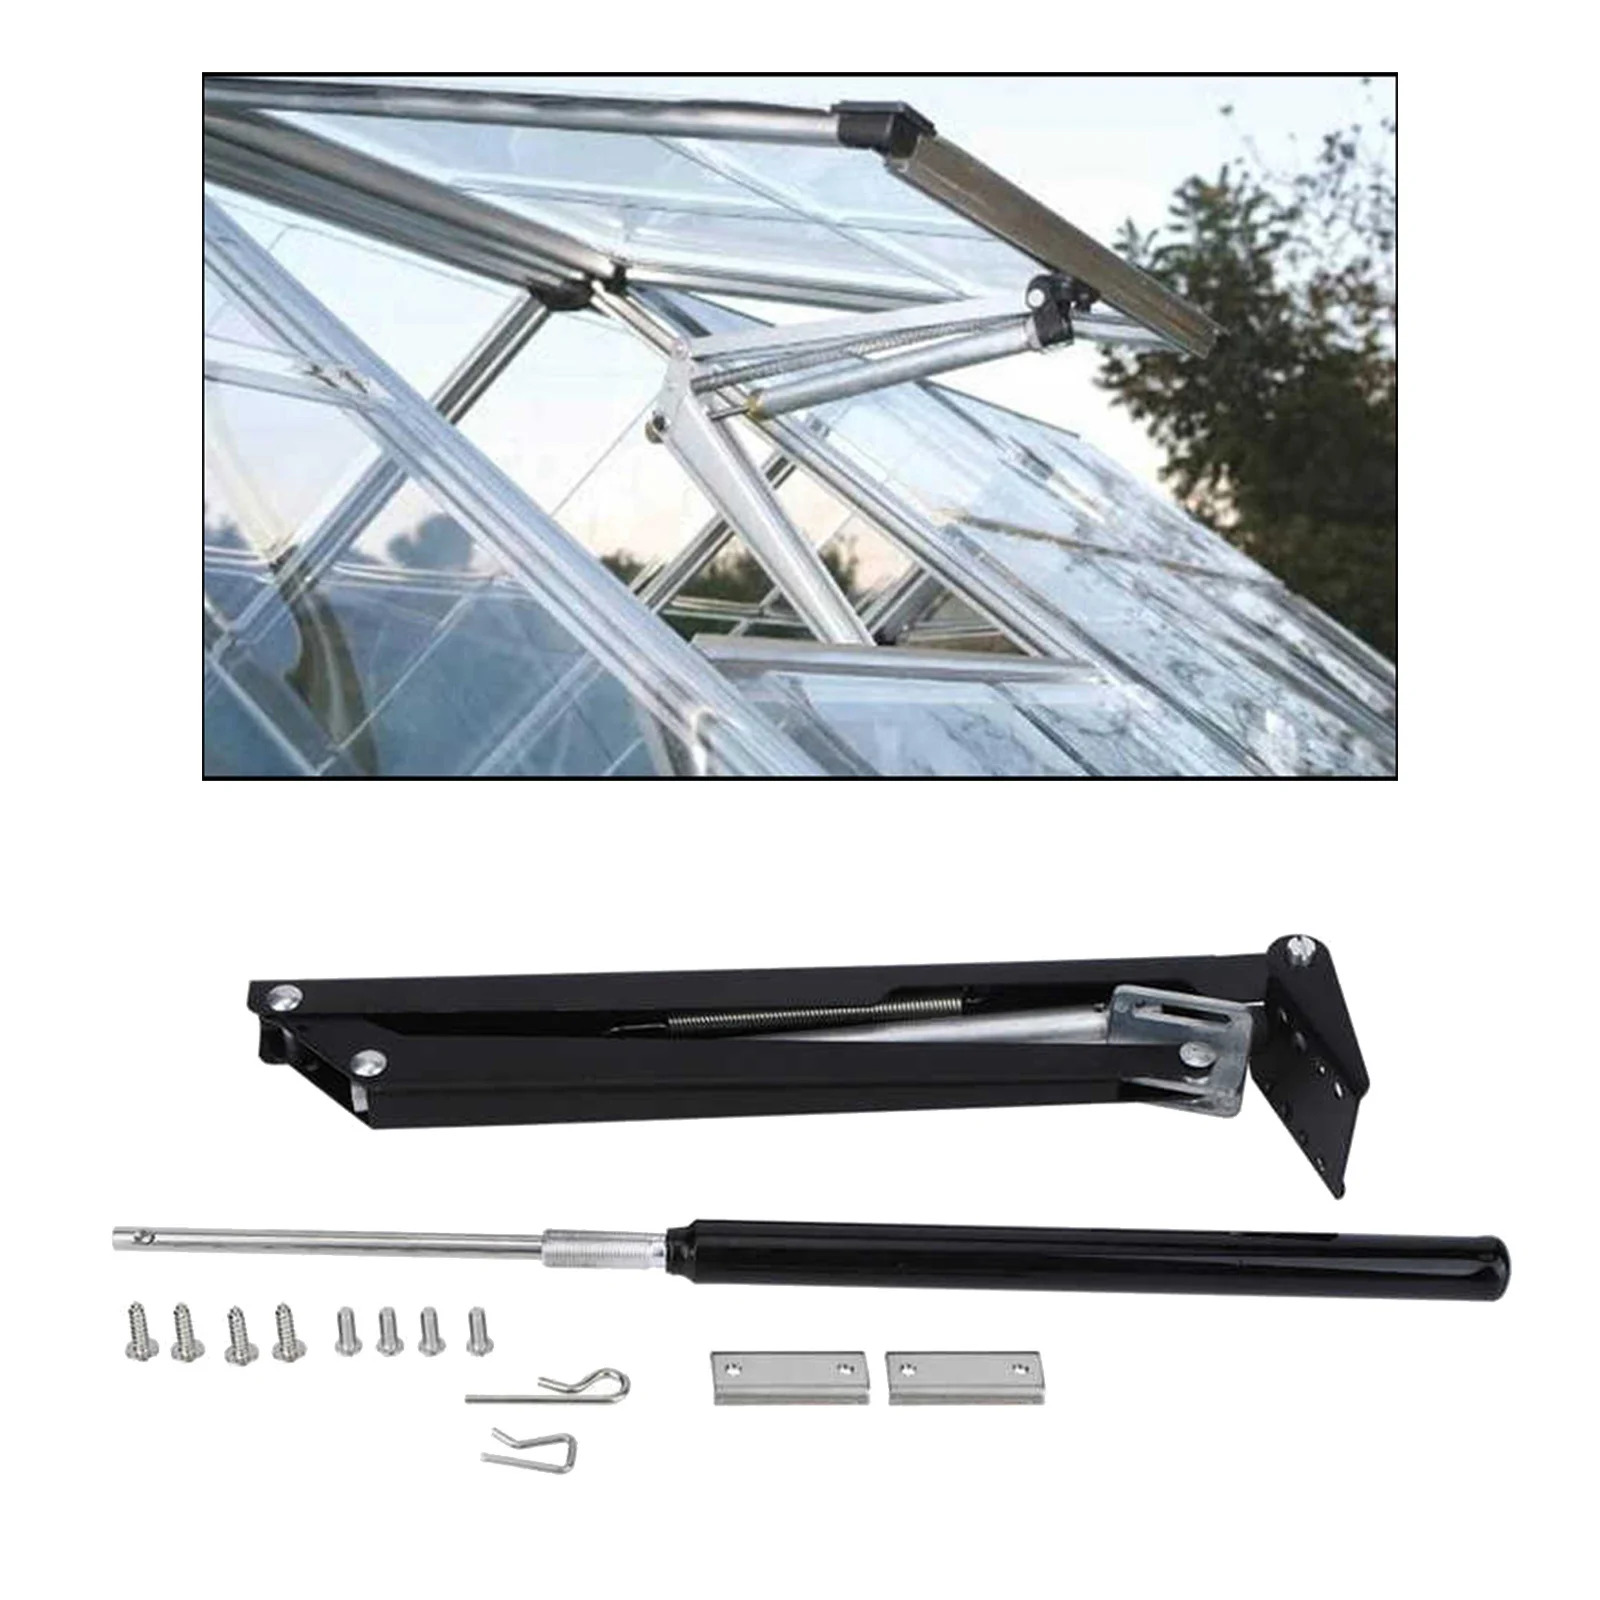 Greenhouse Window Accessories Automatic Vent Roof Opener Solar Sensing